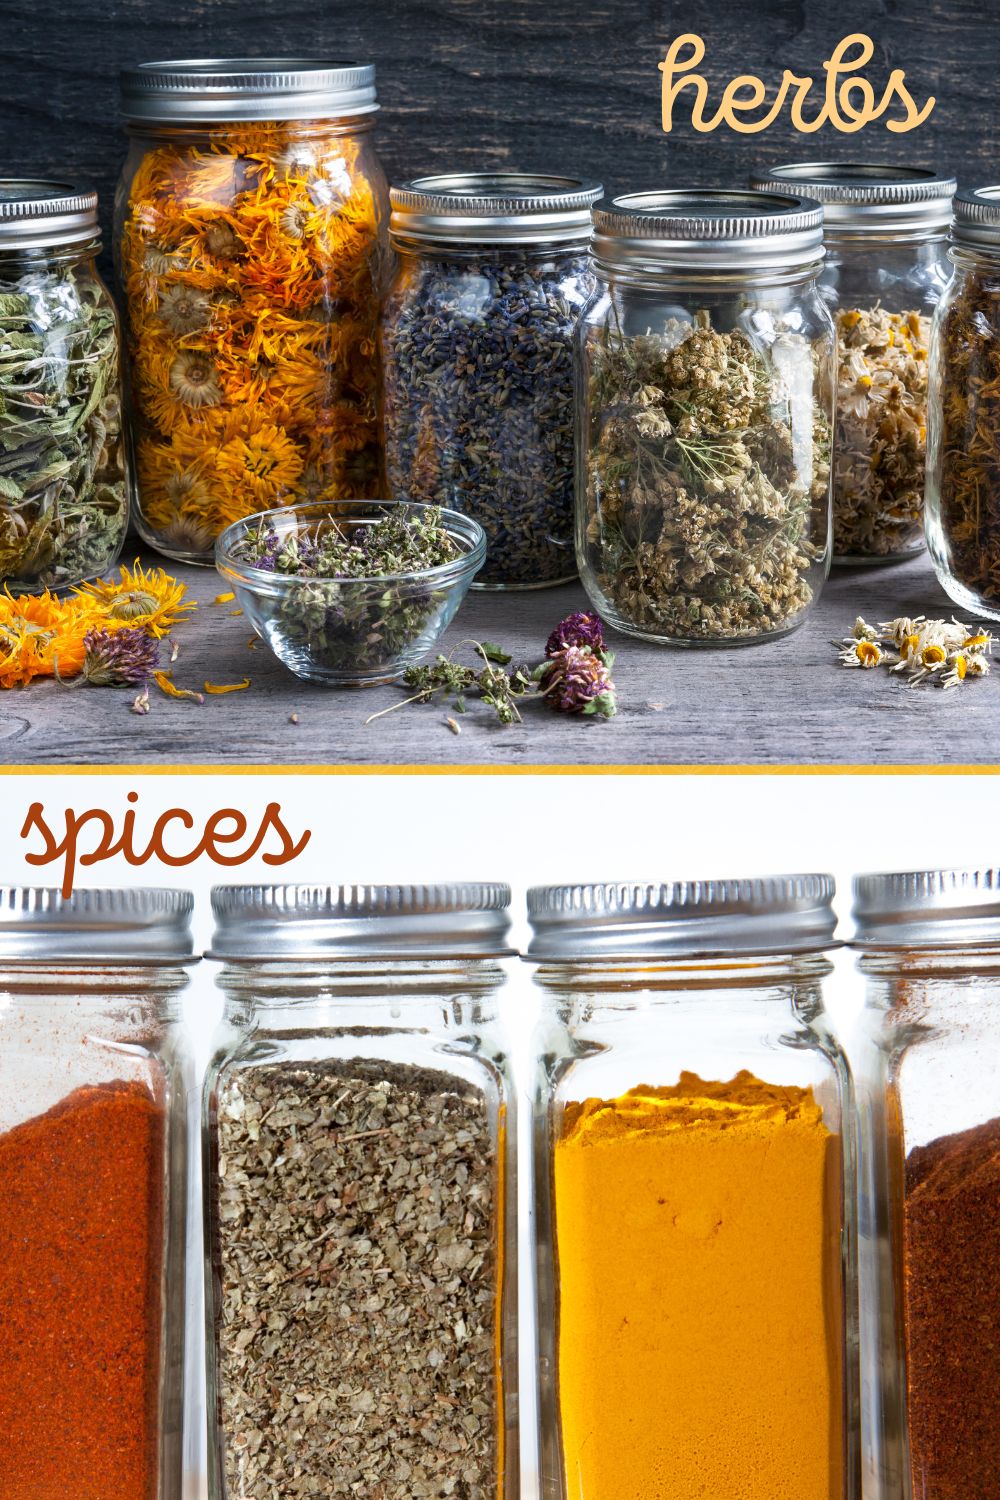 A collage depicting herbs vs spices